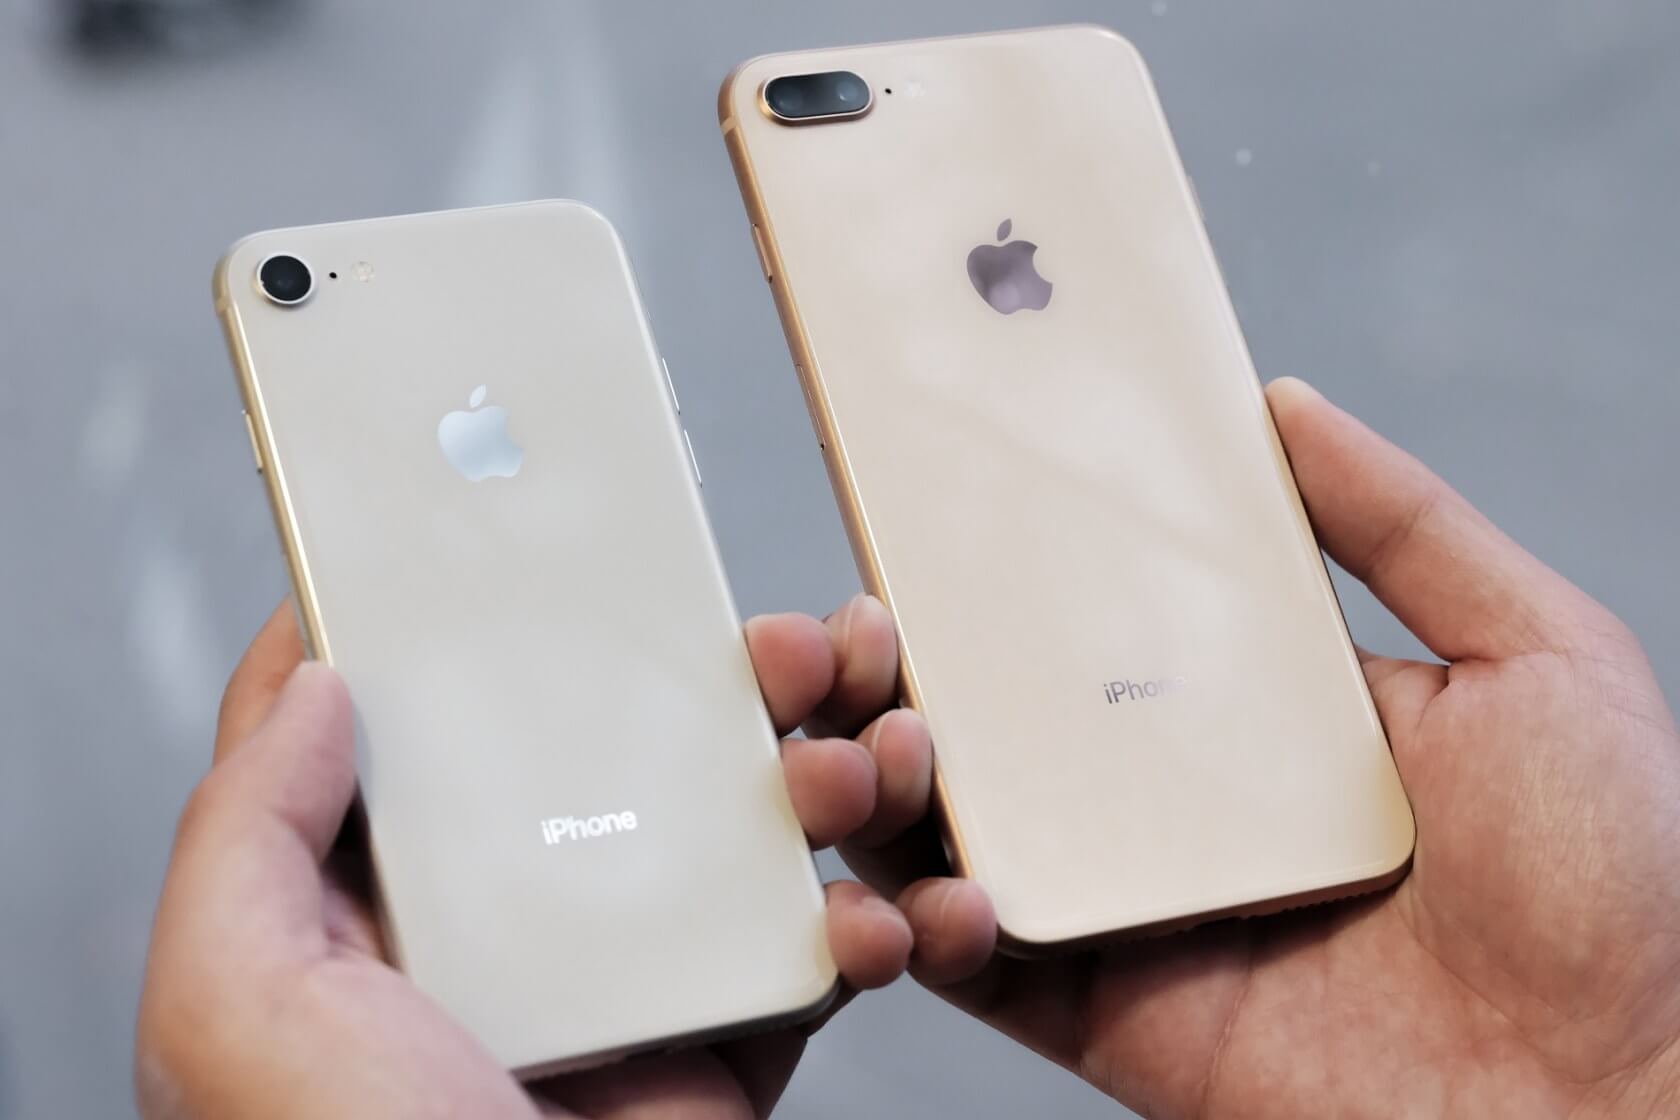 The iPhone 8 was the world's best-selling smartphone in May